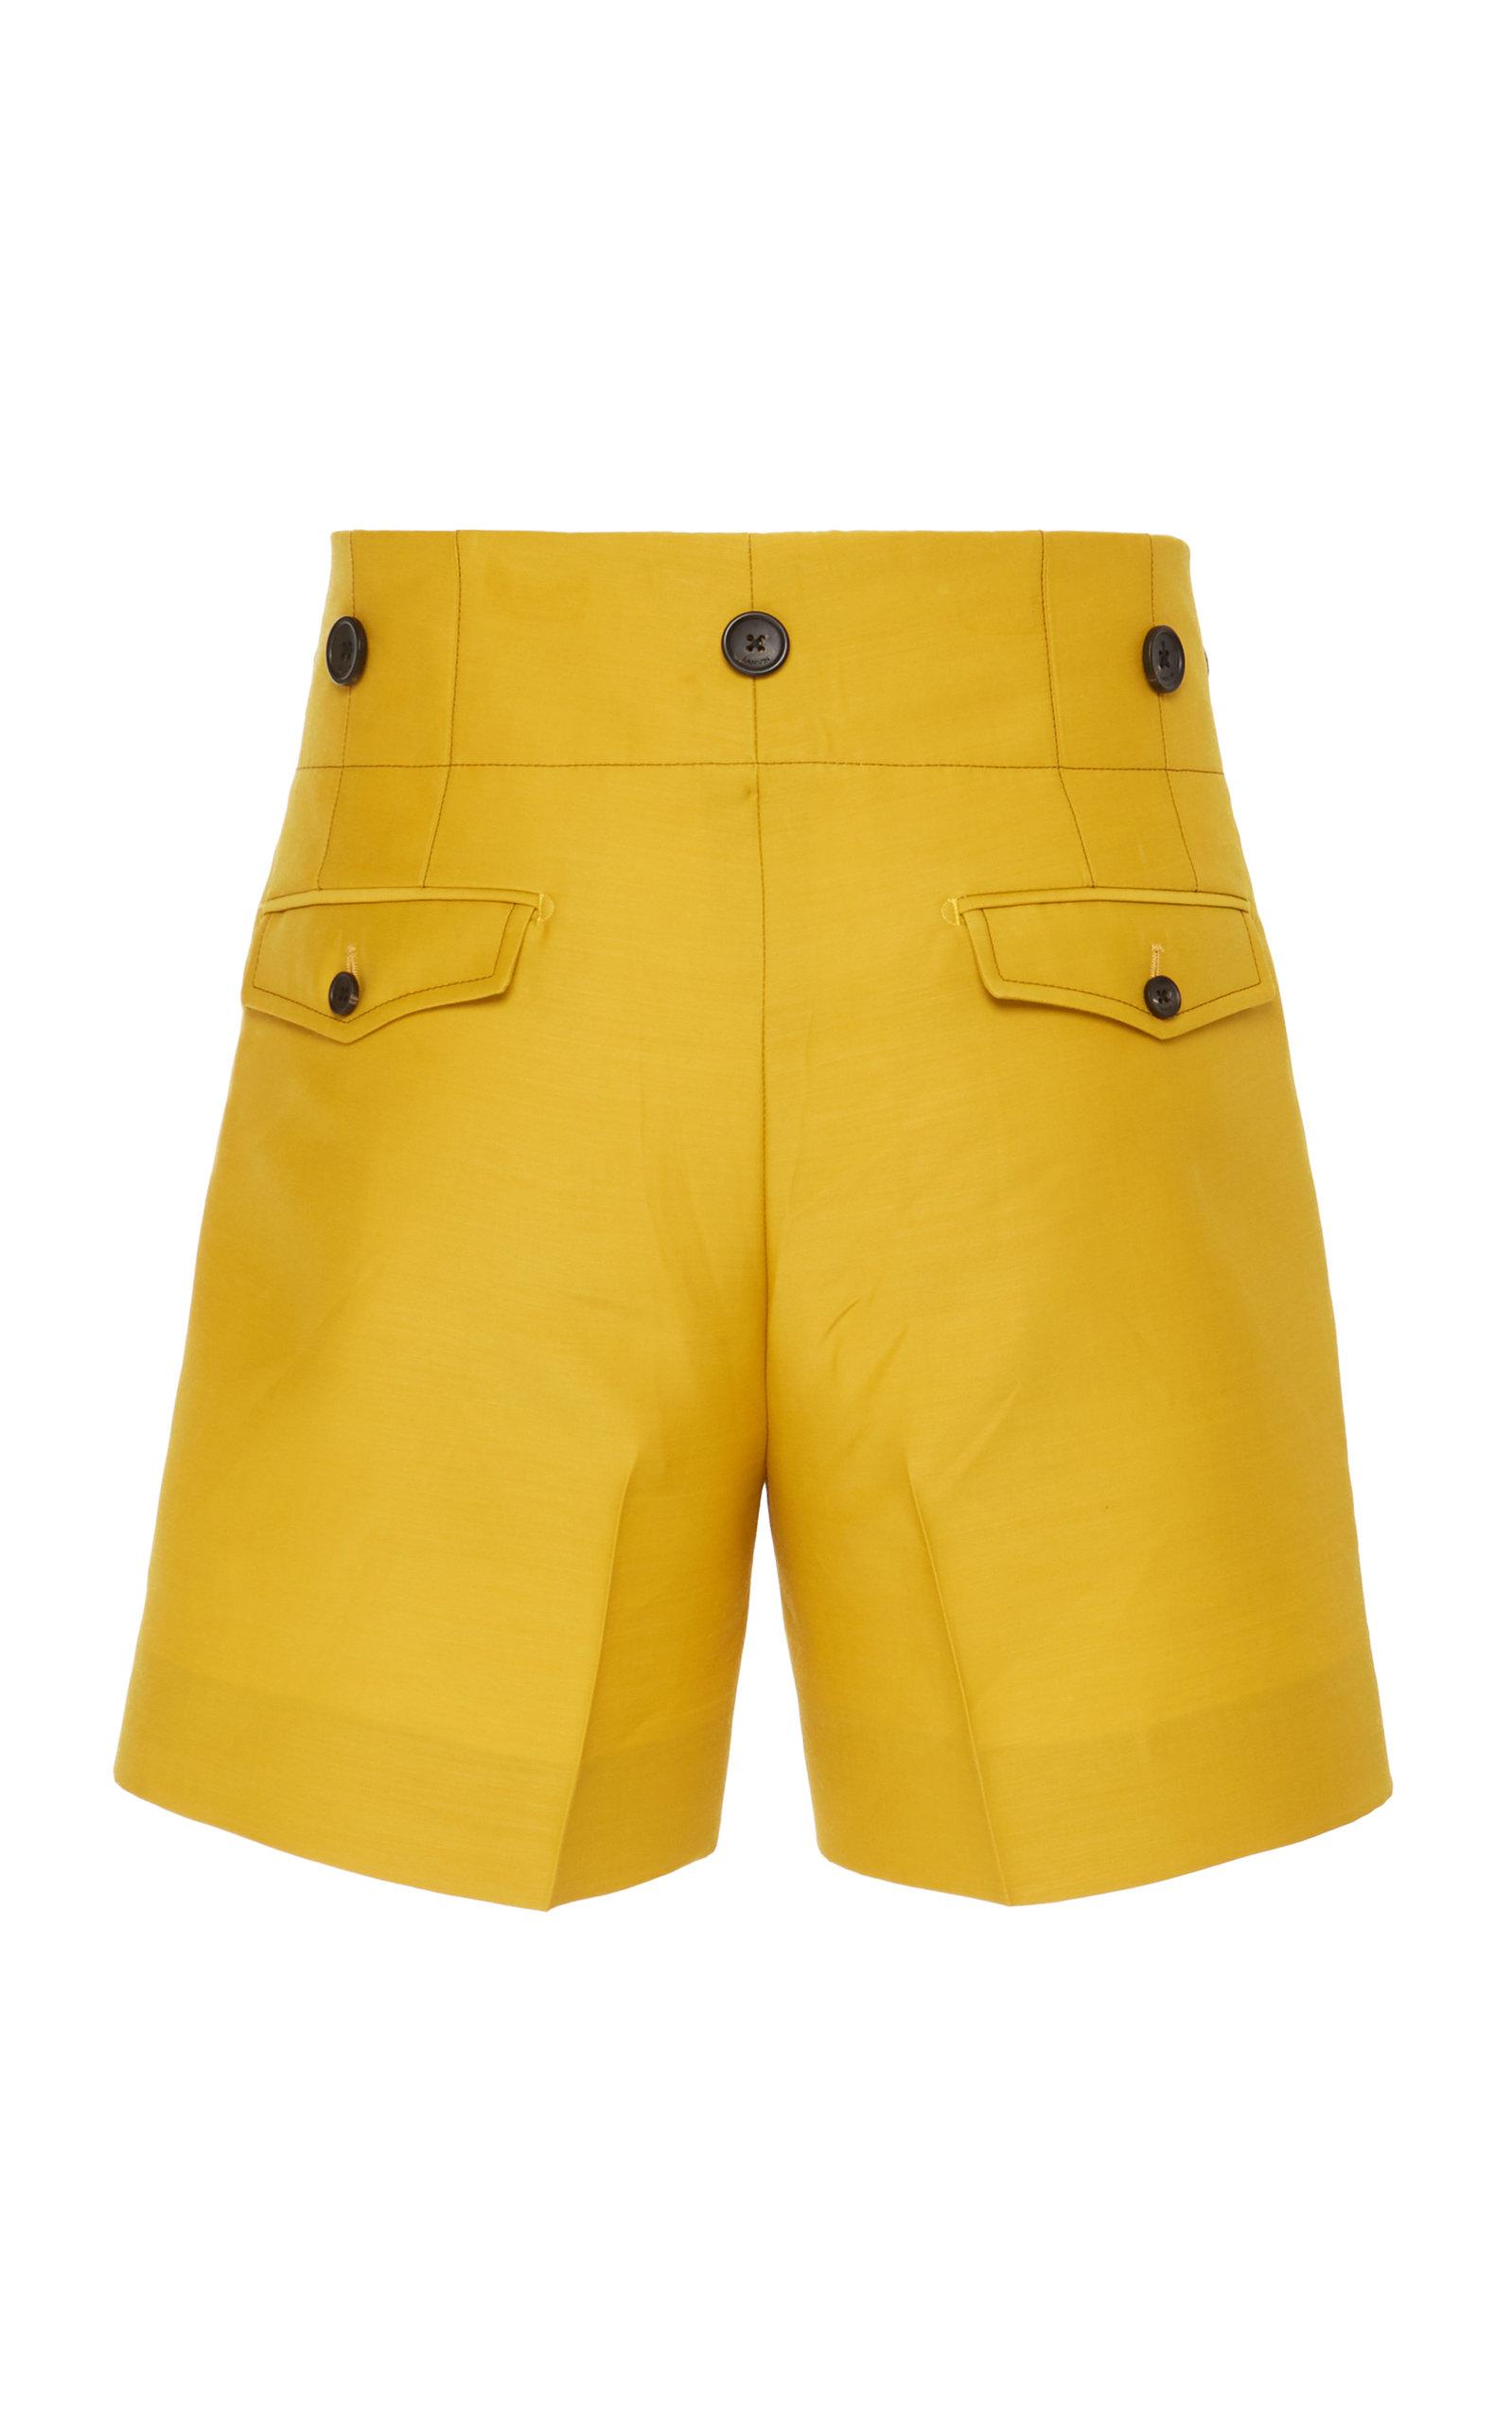 Lanvin Cotton Mid-rise Shorts in Yellow for Men - Lyst